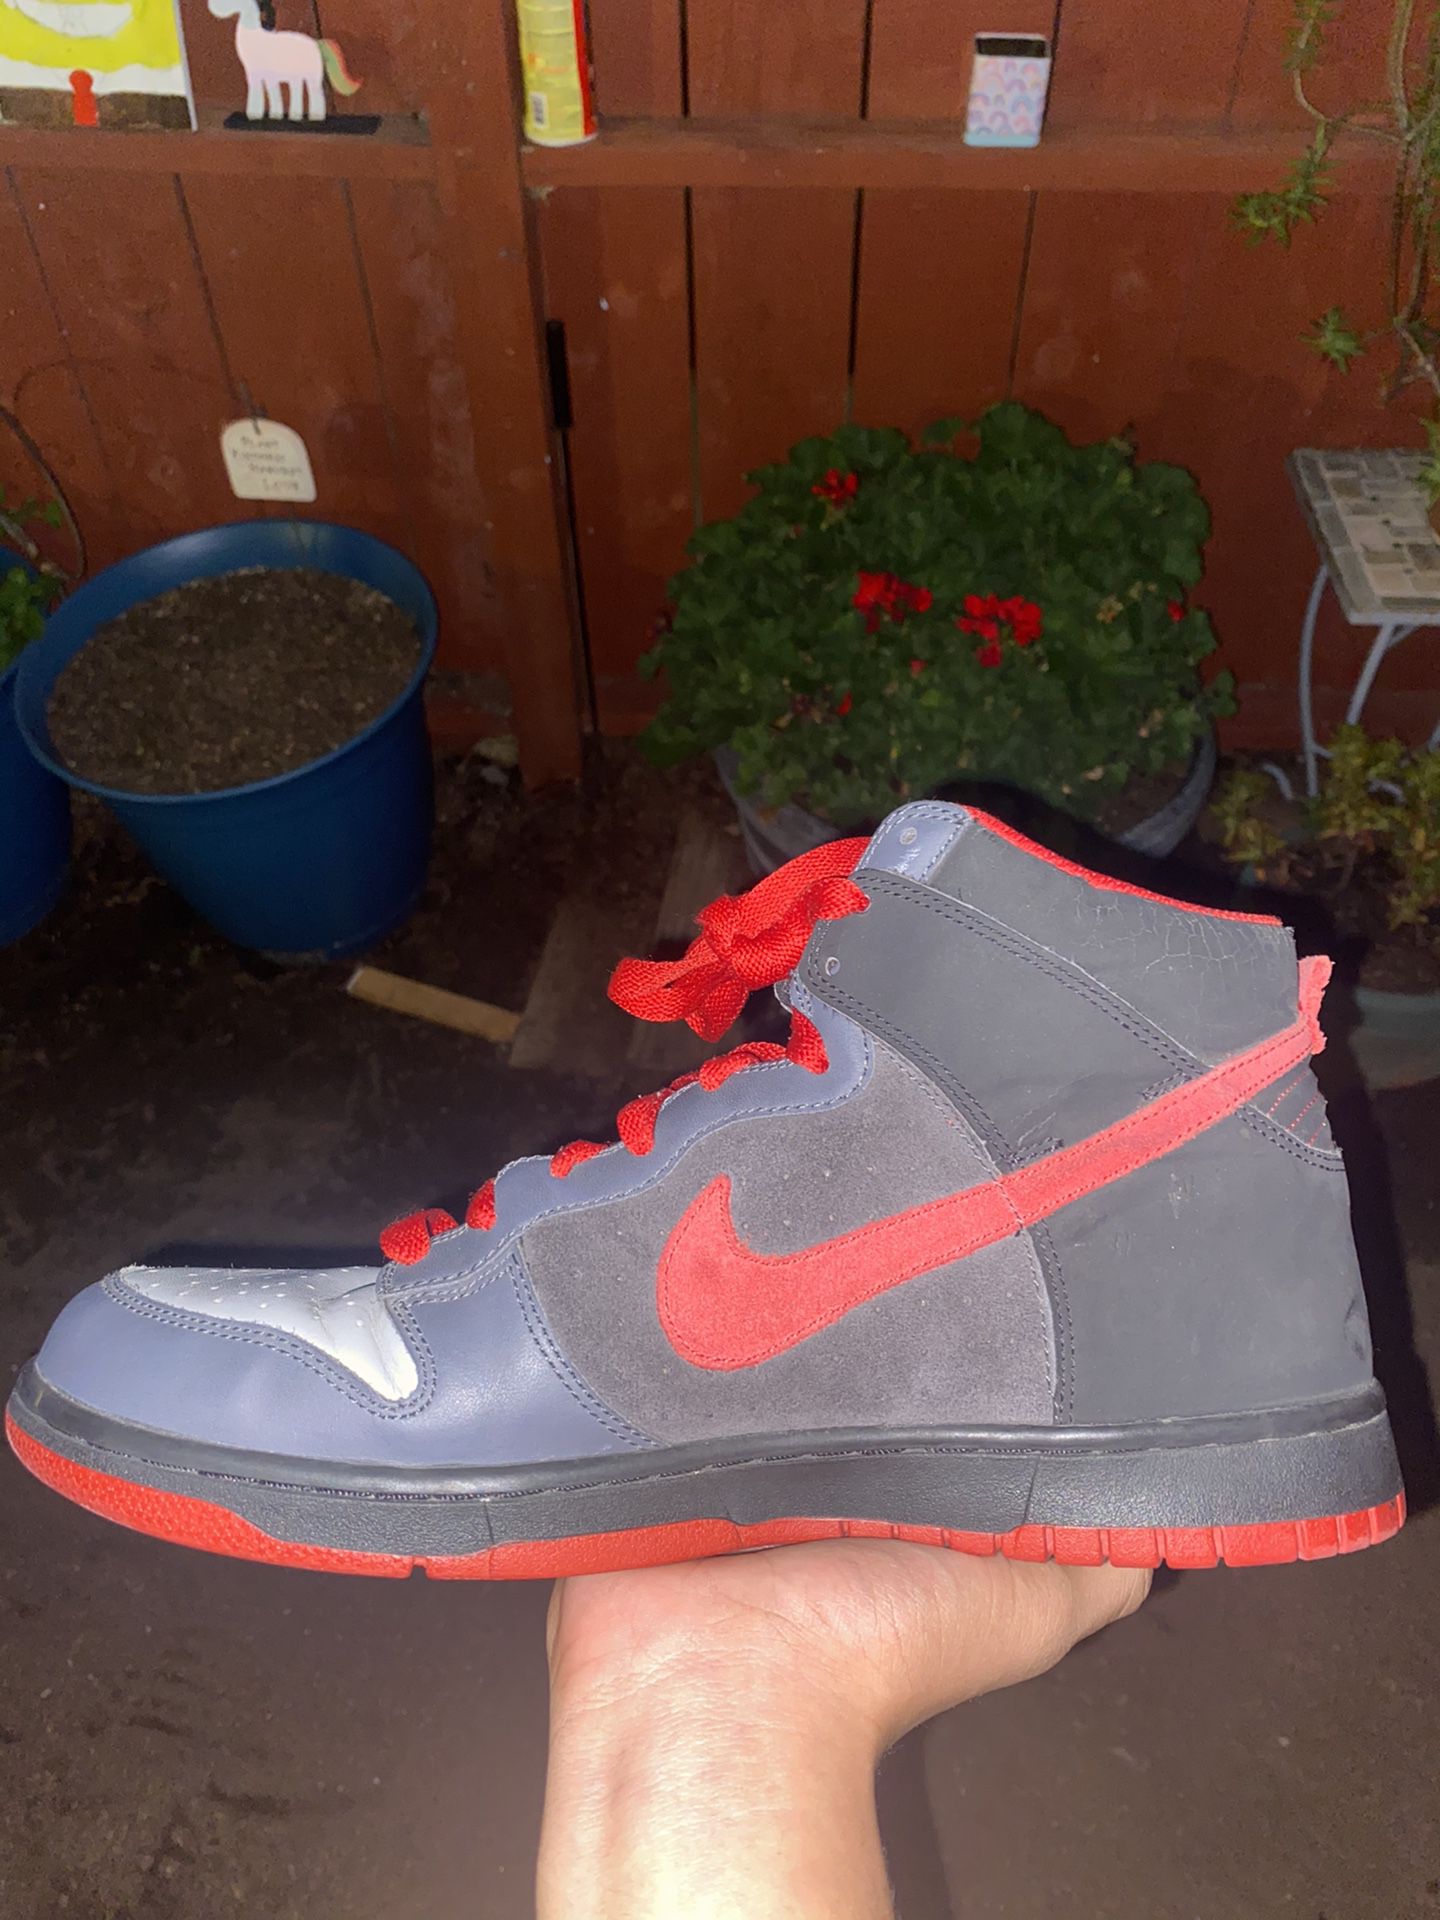 running a $5 raffle for these vintage sb highs